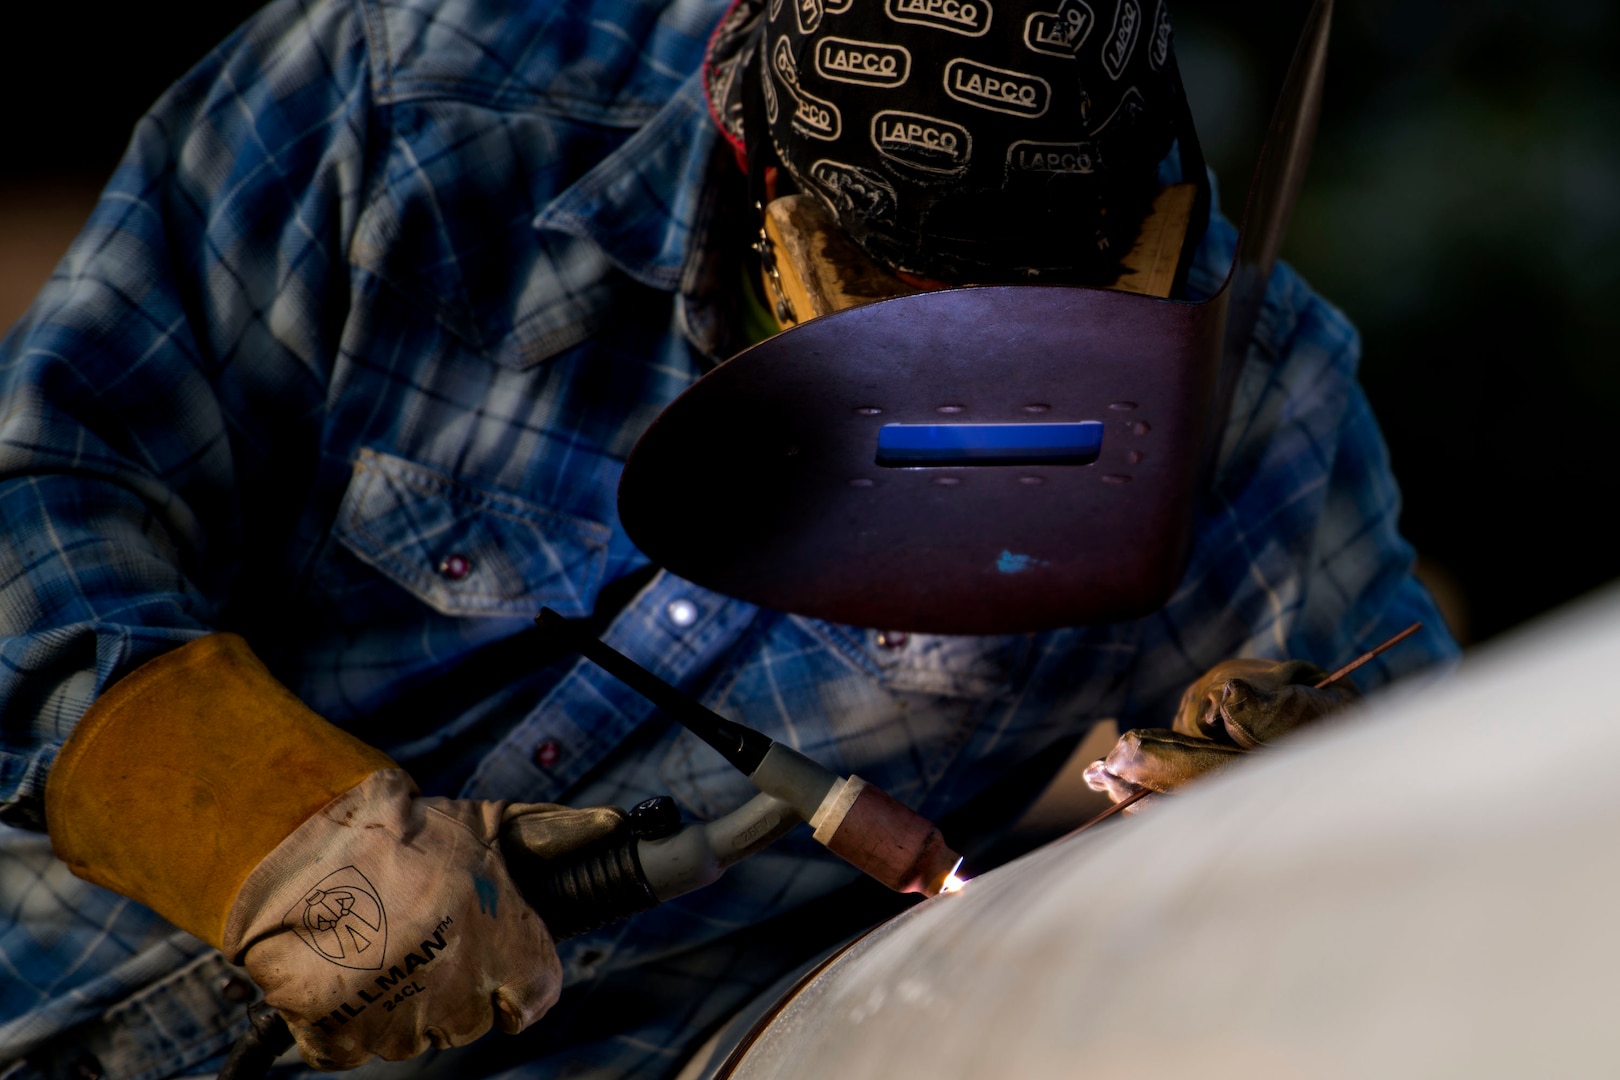 Michael Martin, a civilian welder, performs welding work on a pipe in the 23d Logistics Readiness Squadron (LRS) fuel yard, July 18, 2018, at Moody Air Force Base, Ga. For the first time since the 1950s, the 23d LRS is modernizing the yard to improve fuel efficiency to enhance operations. (U.S. Air Force photo by Airman 1st Class Erick Requadt)